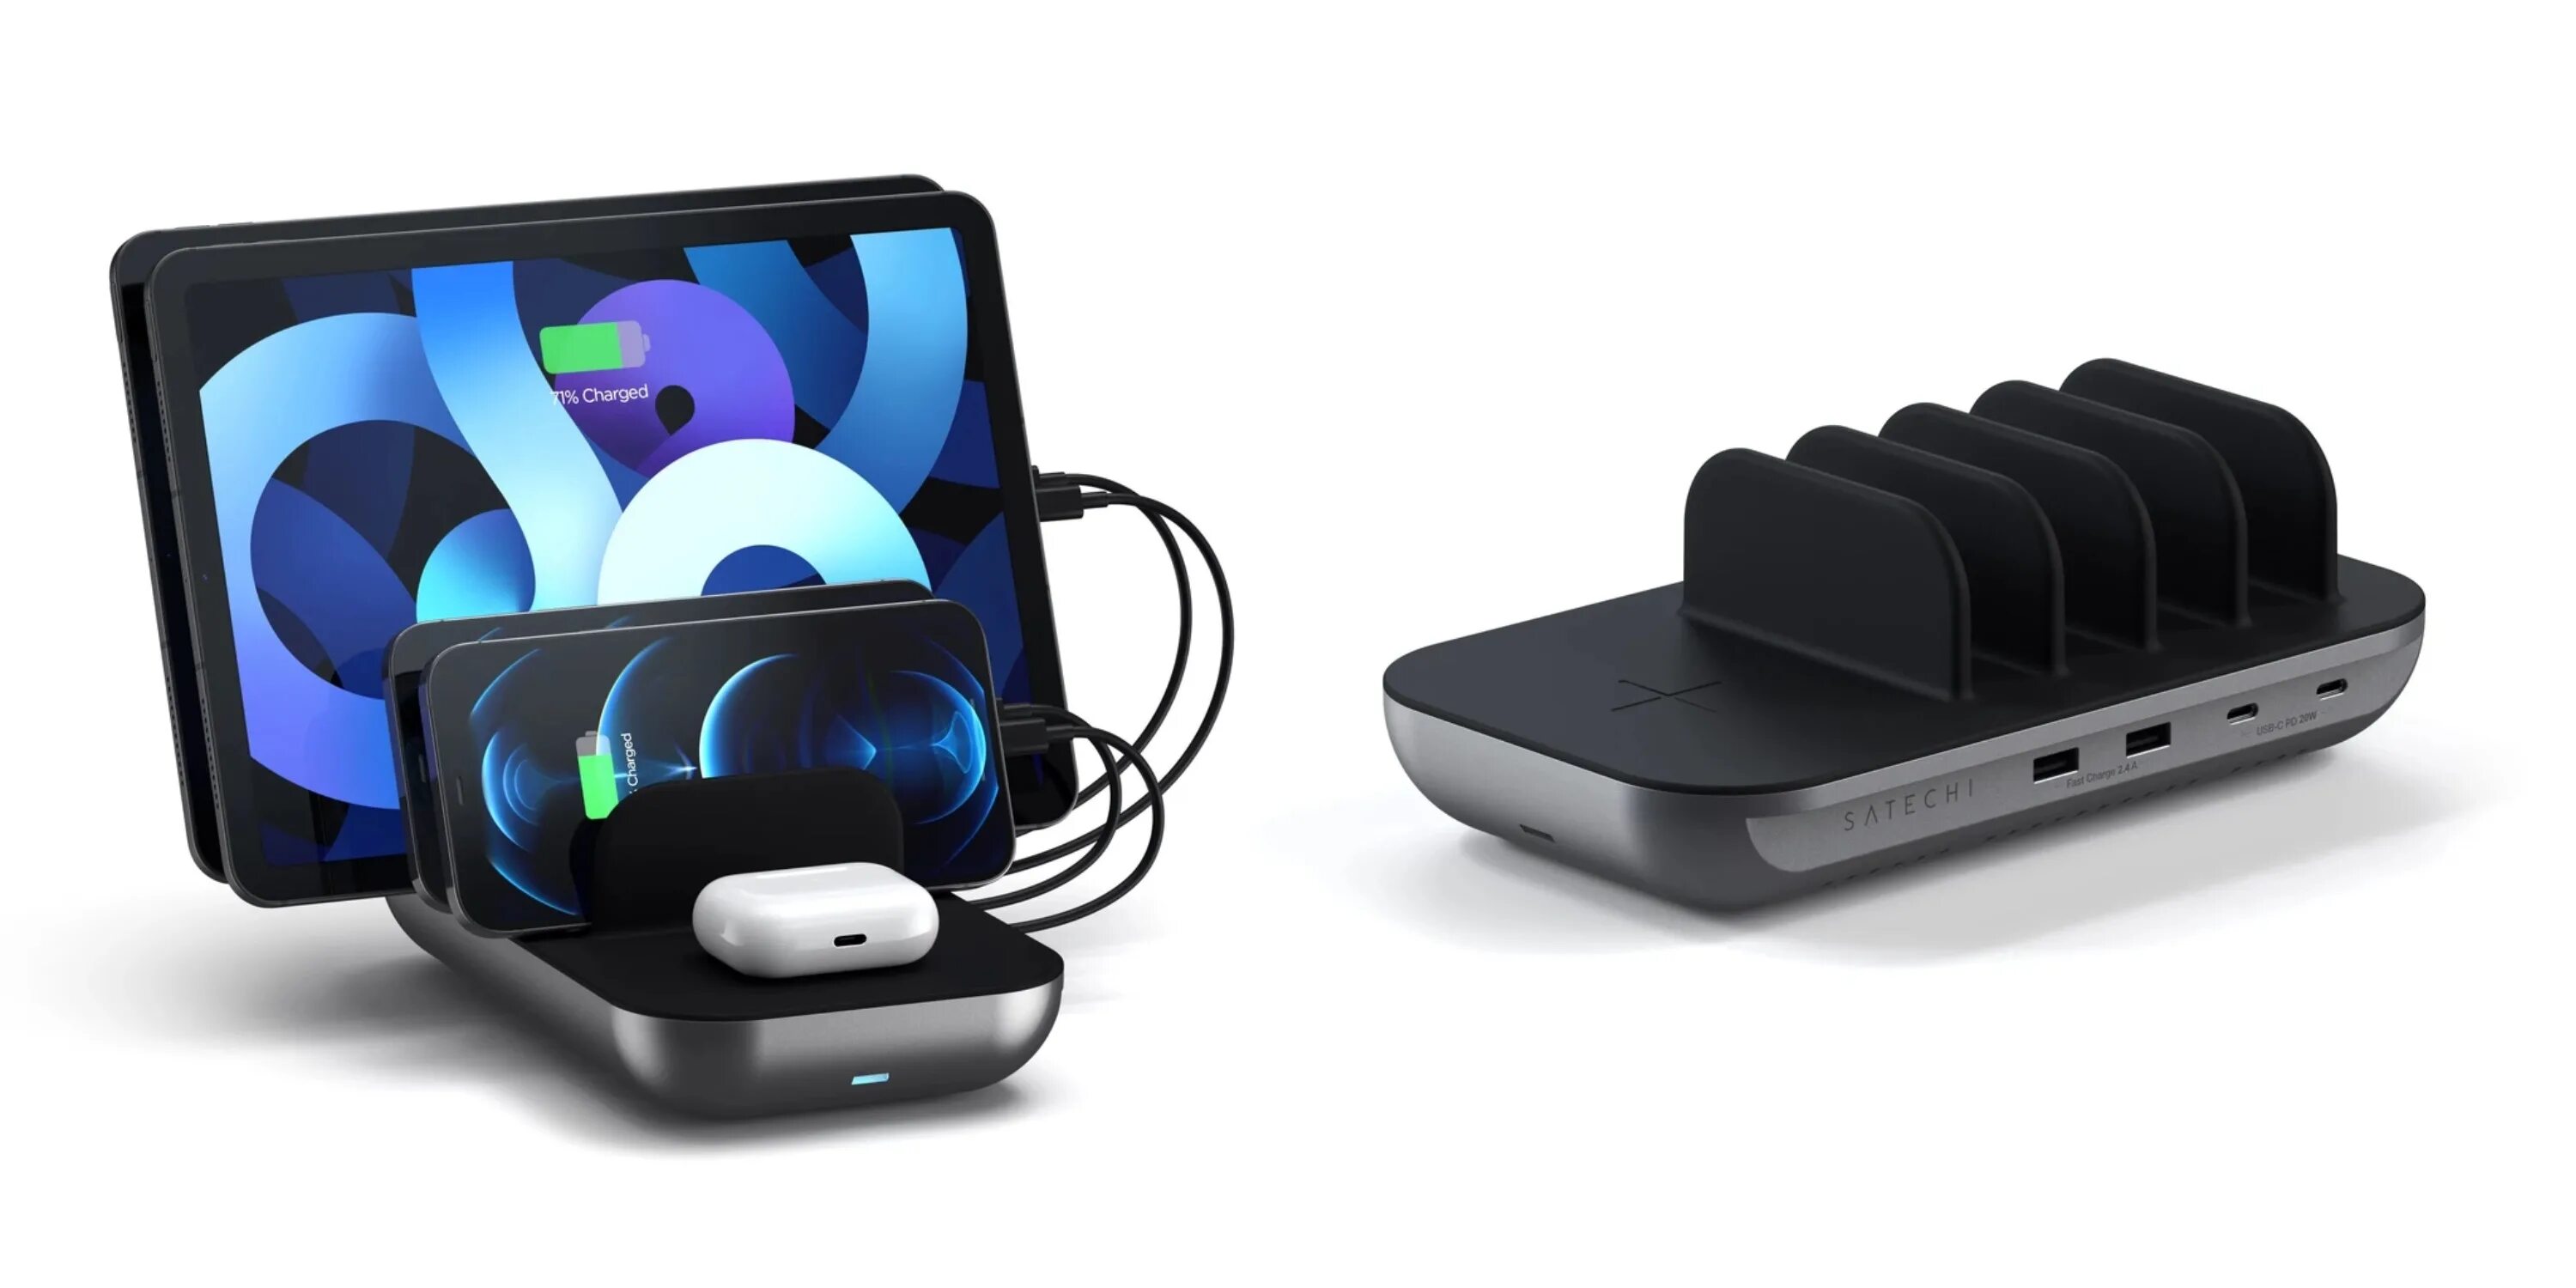 Charge device. Satechi dock5. Satechi dock5 Multi-device Charging Station with Wireless Charging - Space Gray. Зарядная станция Satechi dock5. Док-станция для смартфона Satechi dock5 MULTIDEVICE Charging Station (St-wcs5pm-eu).